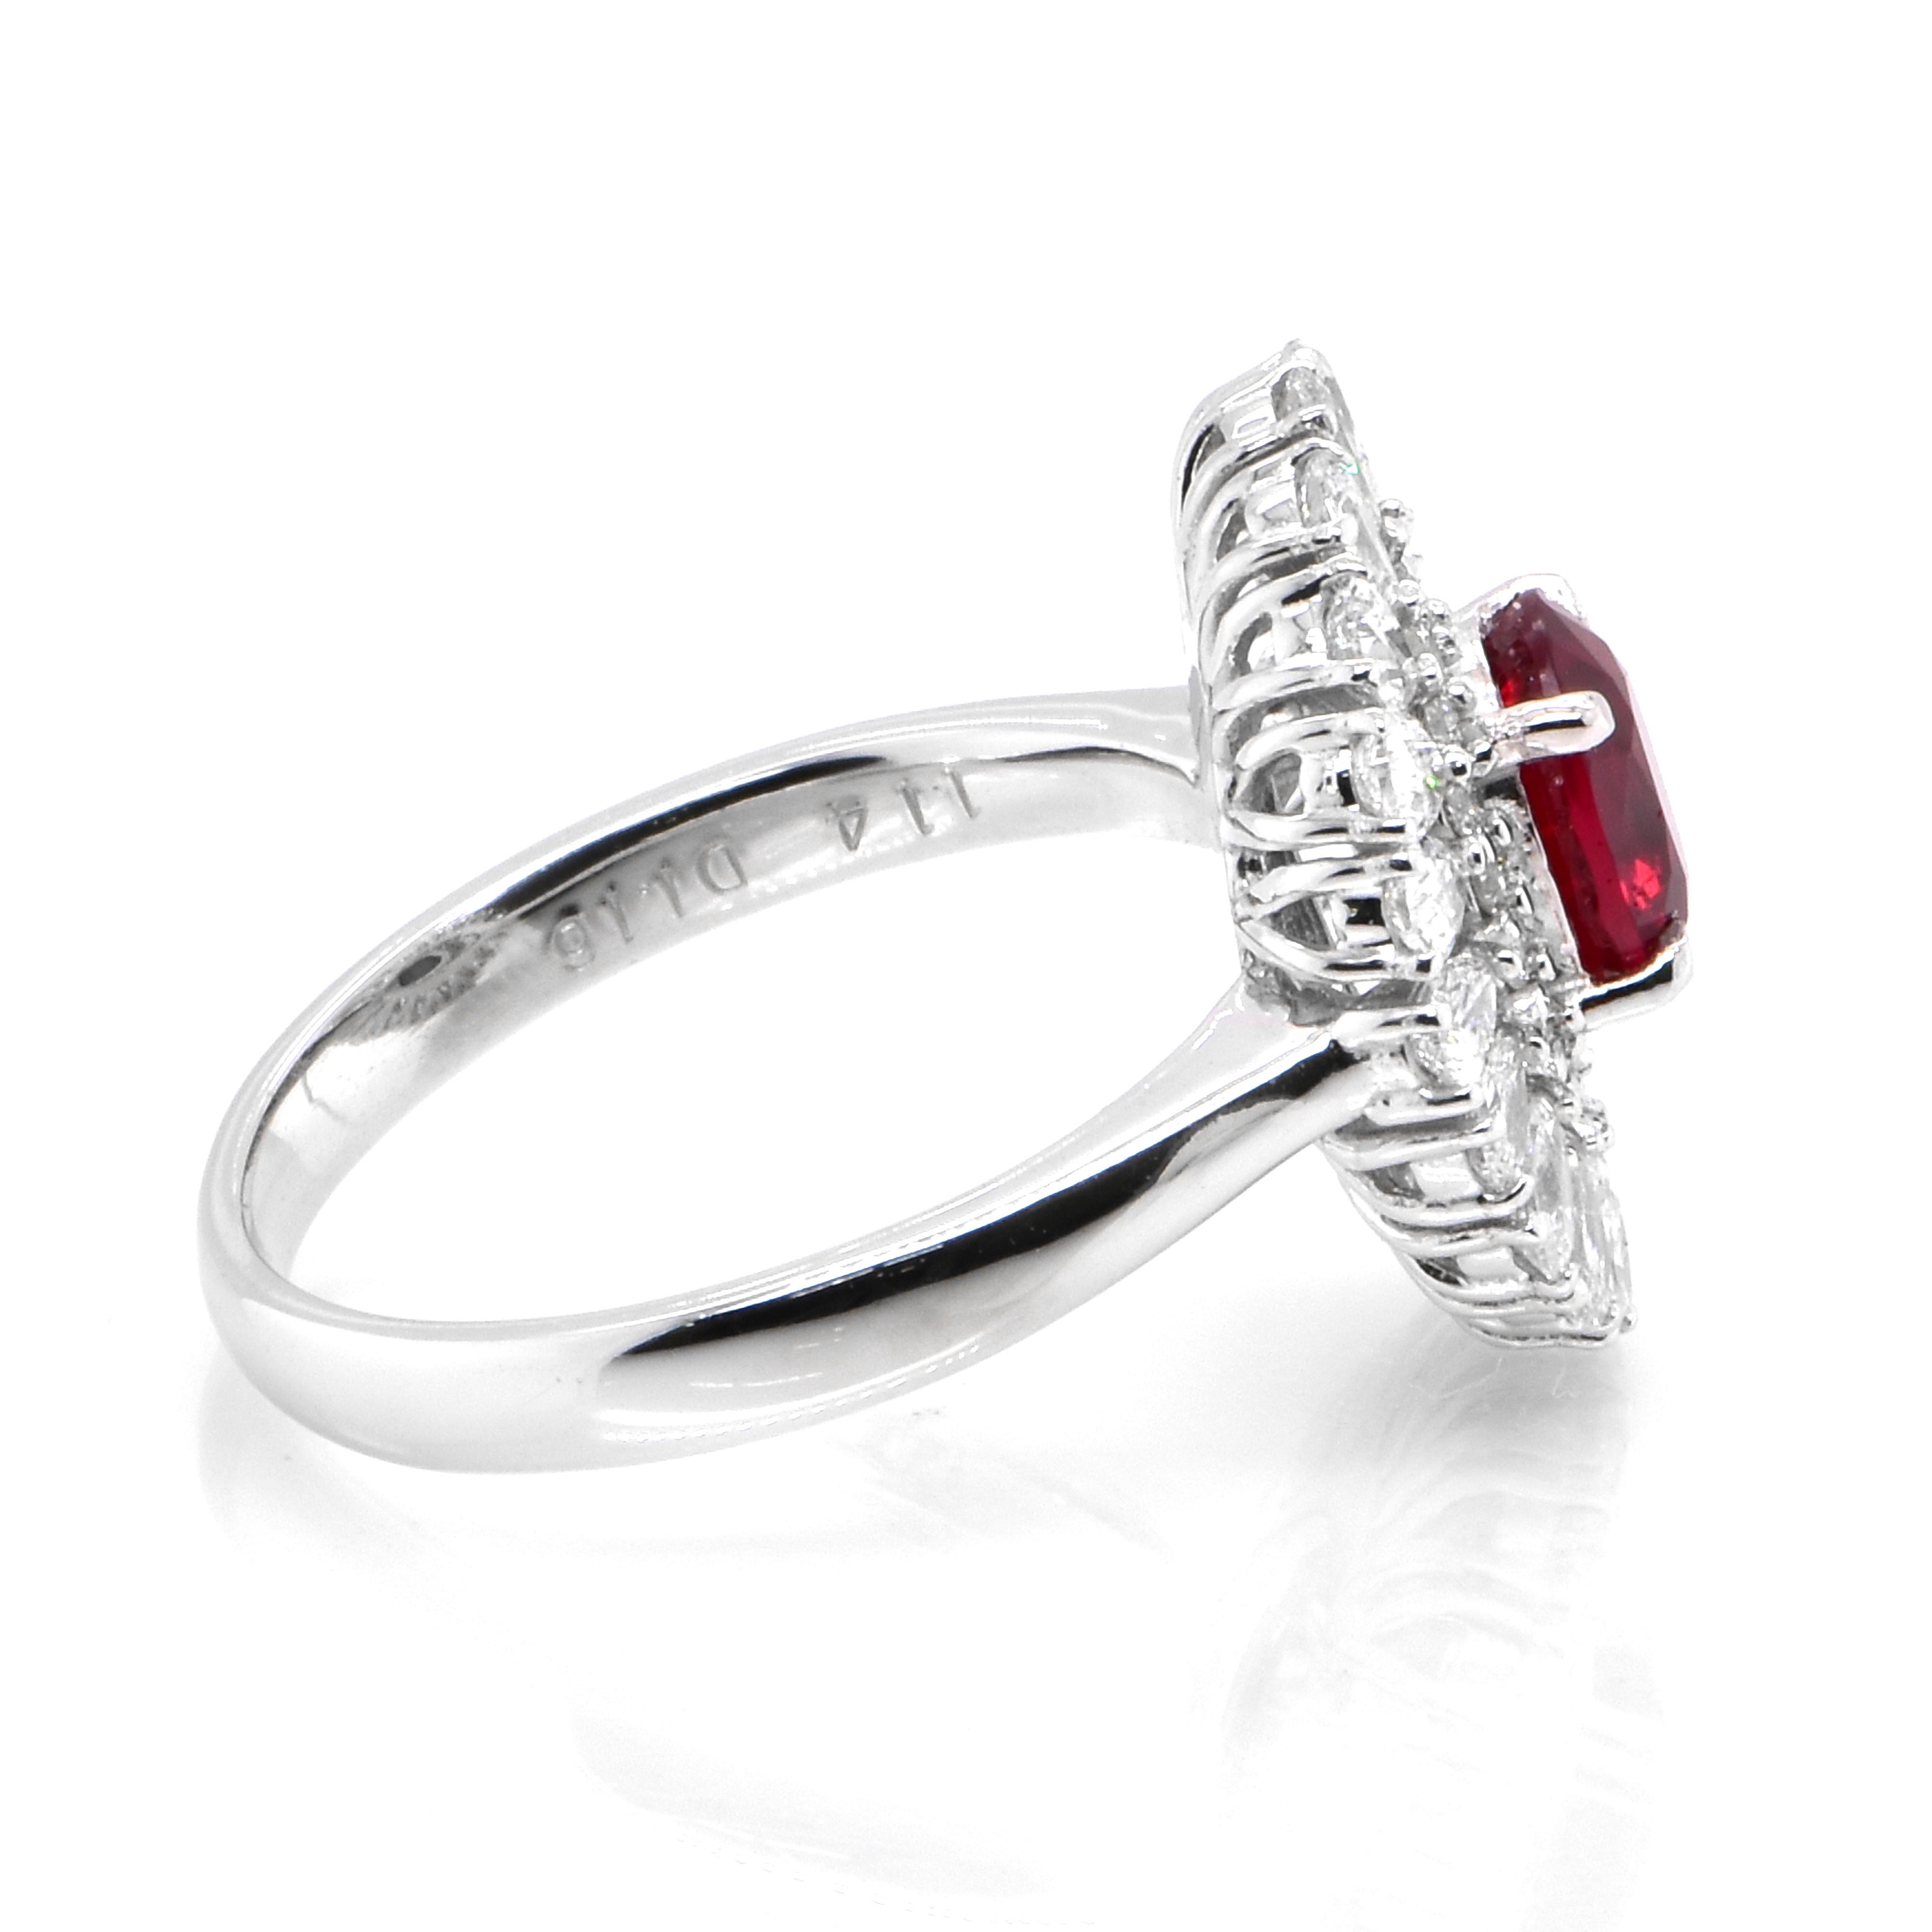 Modern GIA Certified 1.14 Carat, Pigeon Blood Red, Burmese Ruby Ring Made in Platinum For Sale